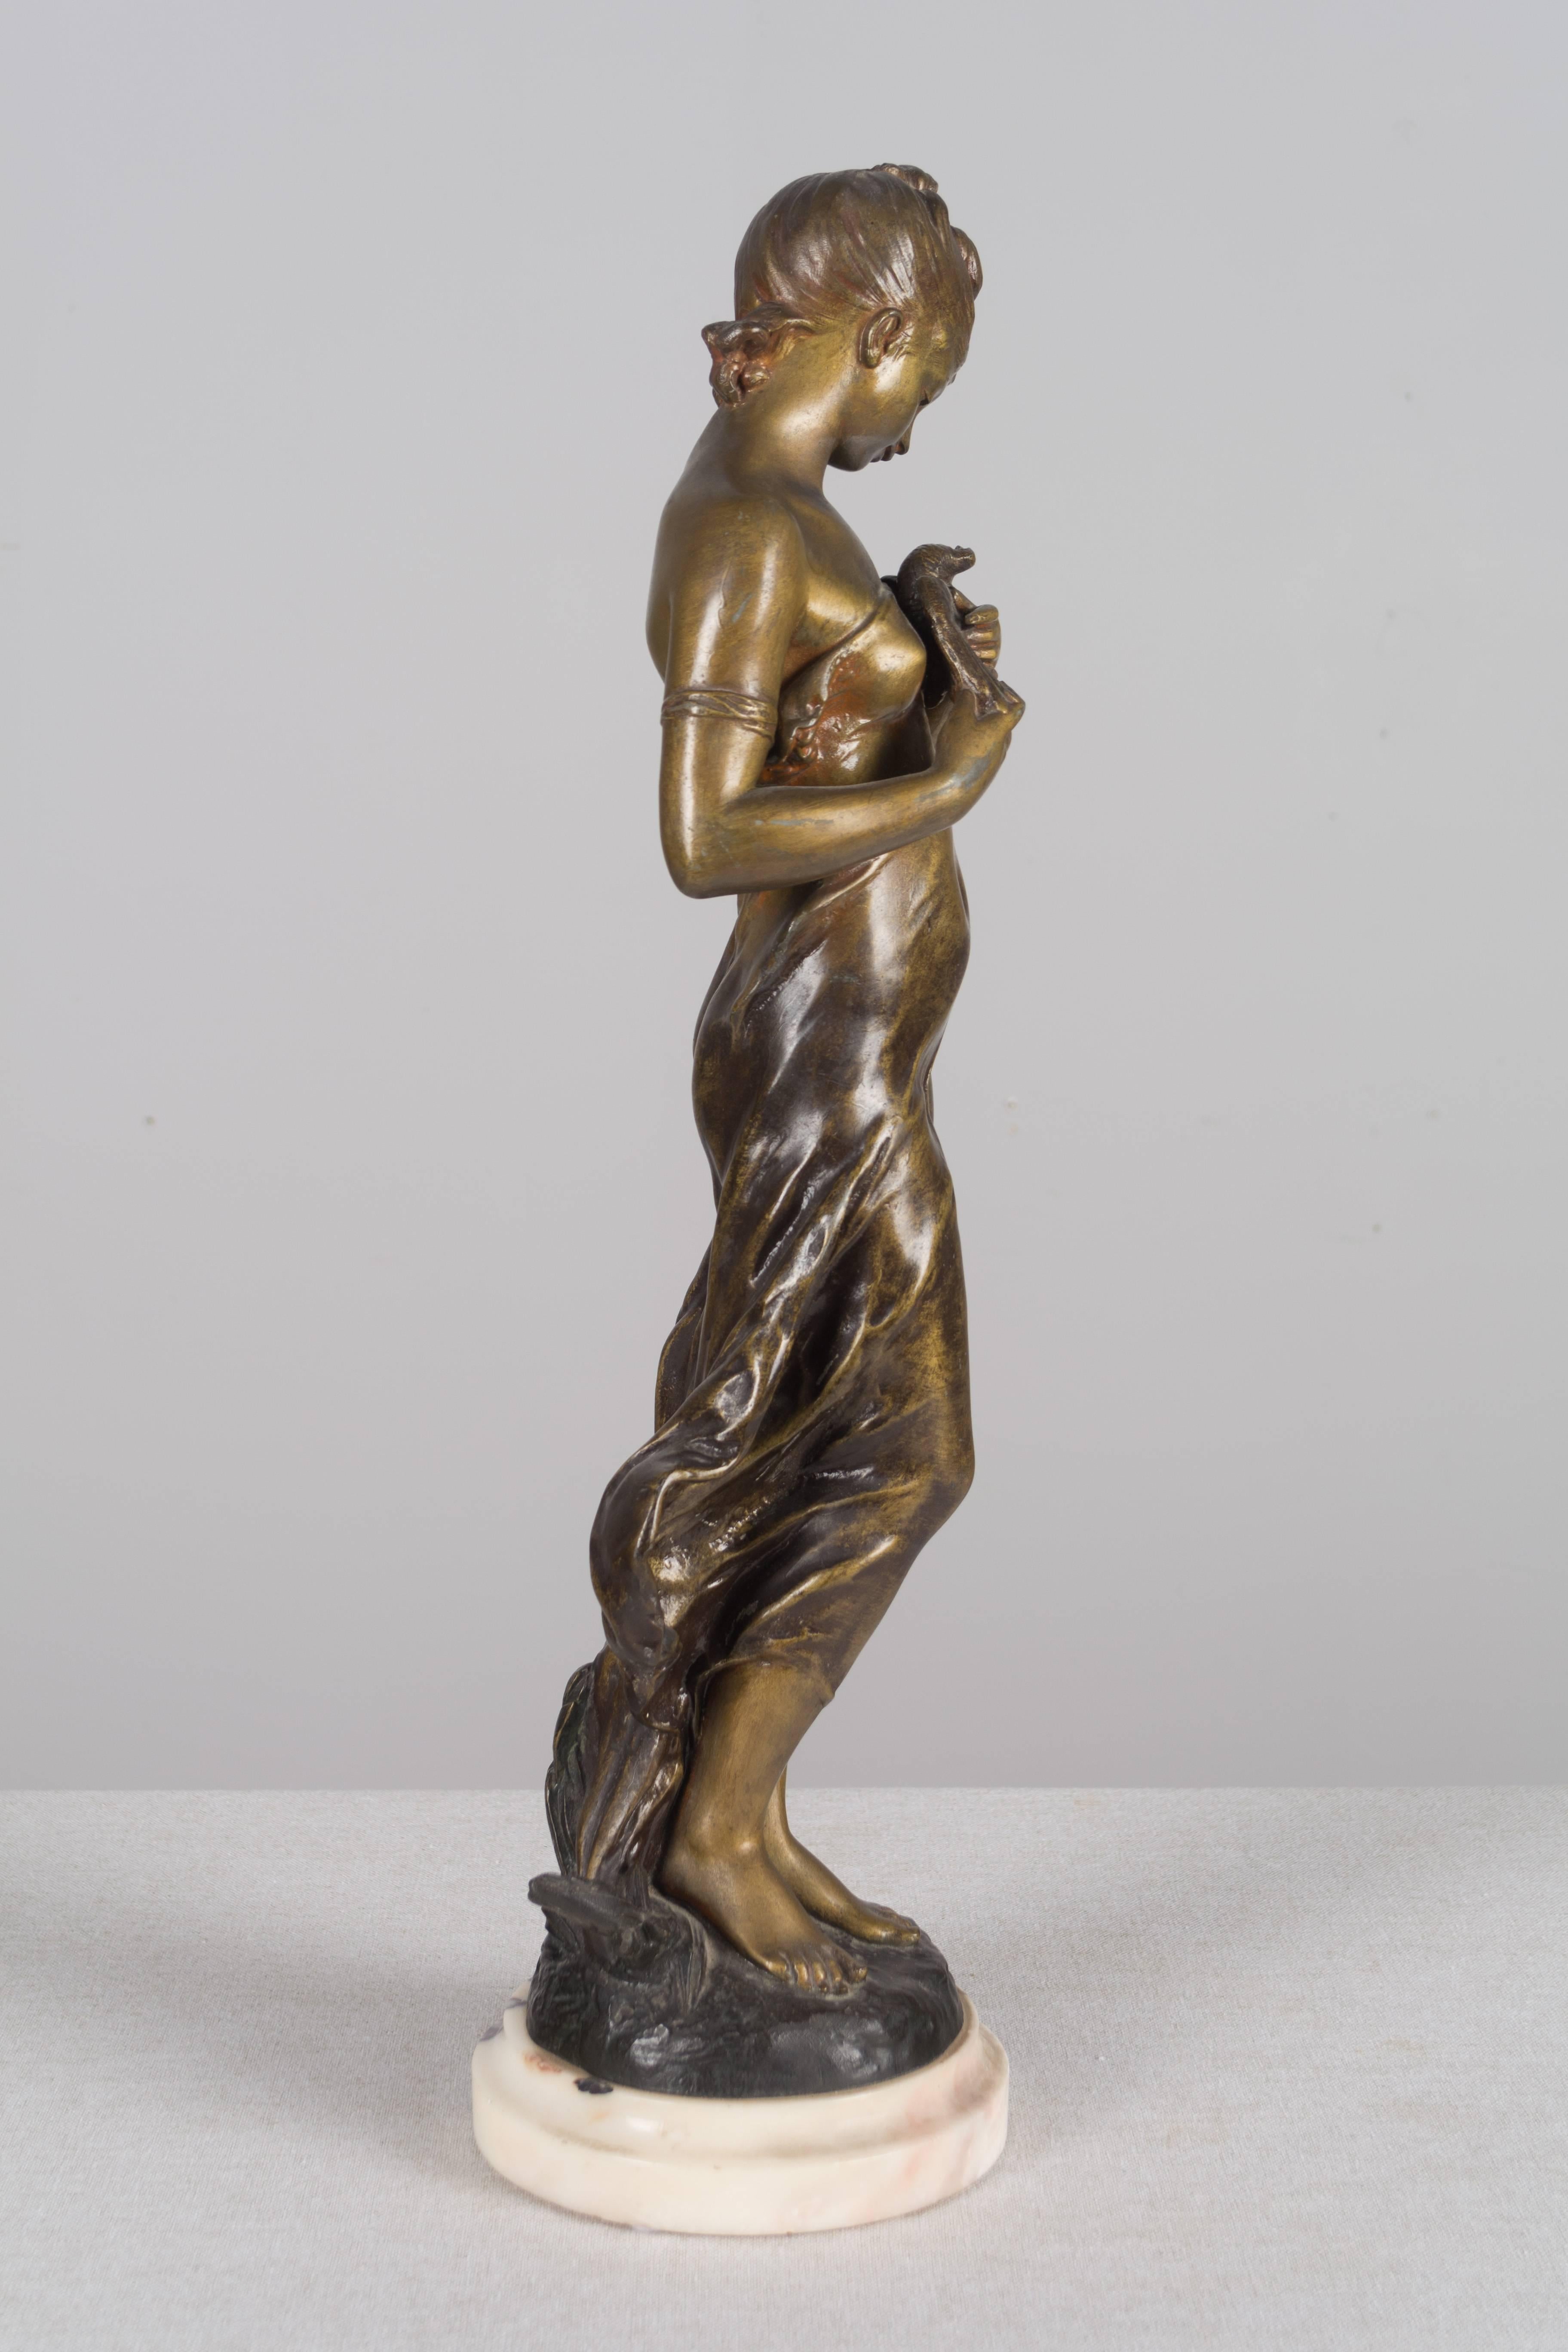 A 19th century French sculpture by Hippolyte Moreau (1832 – 1927) entitled L'Oiseau Blessé depicting a beautiful young girl holding a dove. A pot metal statue with a patina made to look like bronze. Marble base. Signed Hip. Moreau. Weight: 9 lbs.